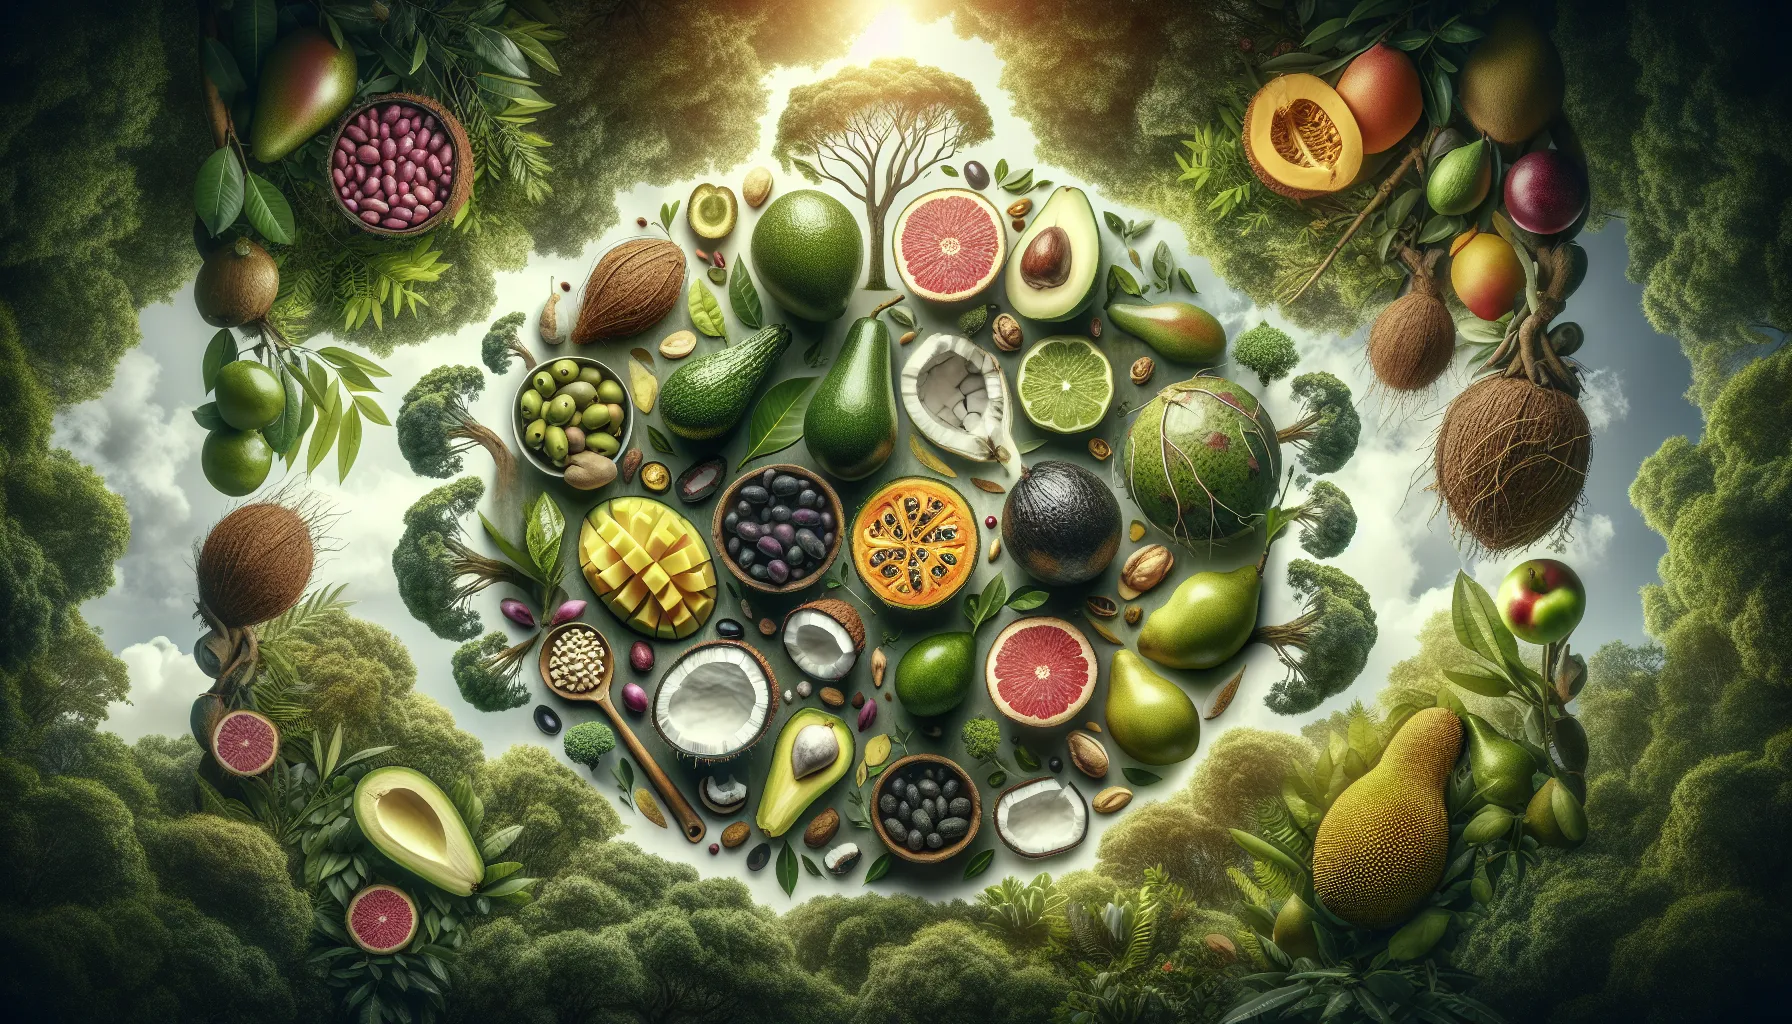 A vibrant collage of exotic fruits and nuts, such as avocados, coconuts, and mangos, answers the question of what vegetables grow on trees amidst a lush forest backdrop.